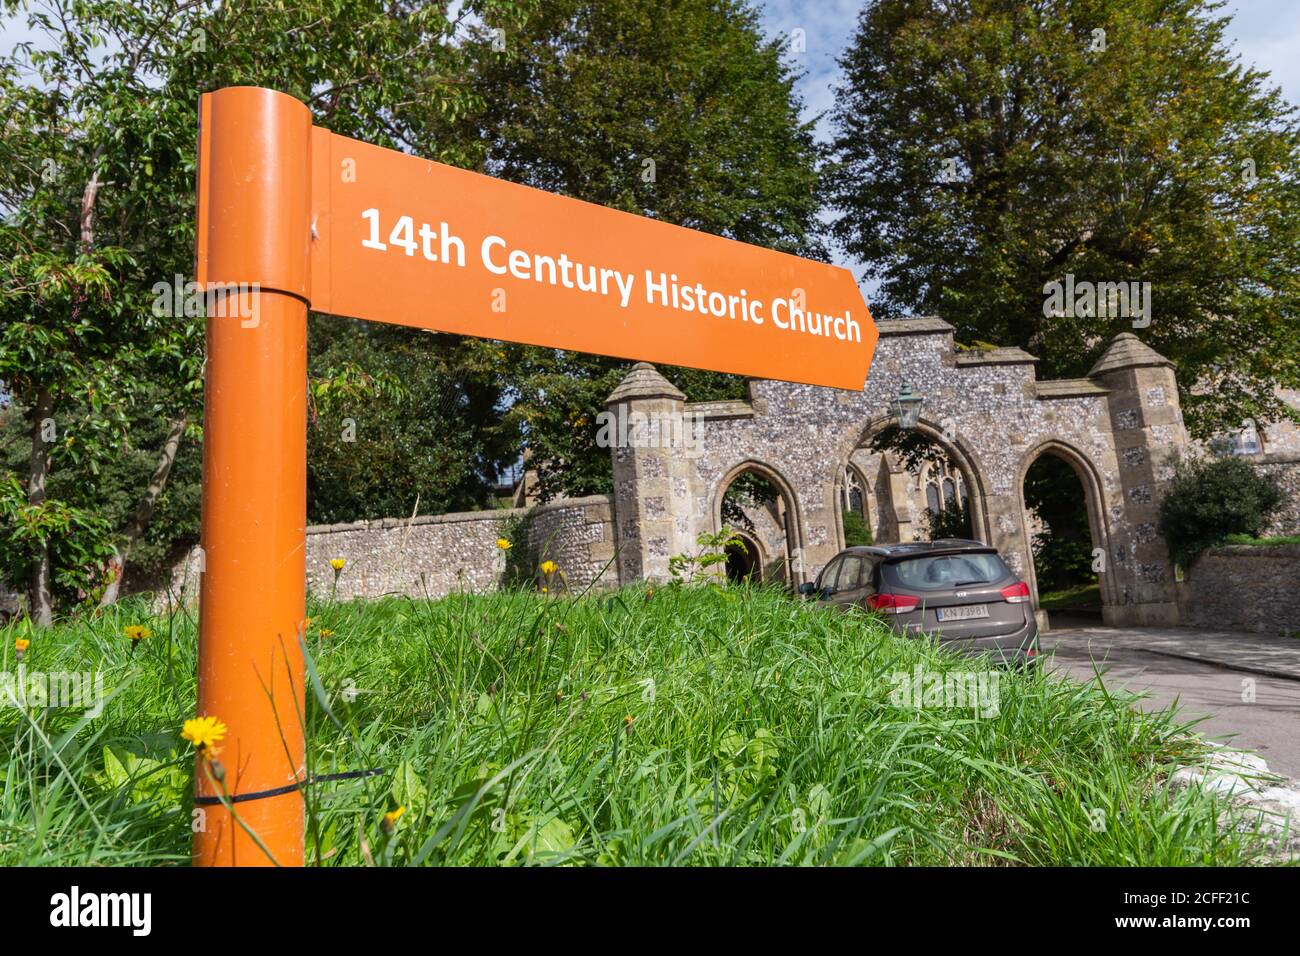 Modern fingerpost sign pointing to a 14th century historic church in Arundel, West Sussex, England, UK. Stock Photo